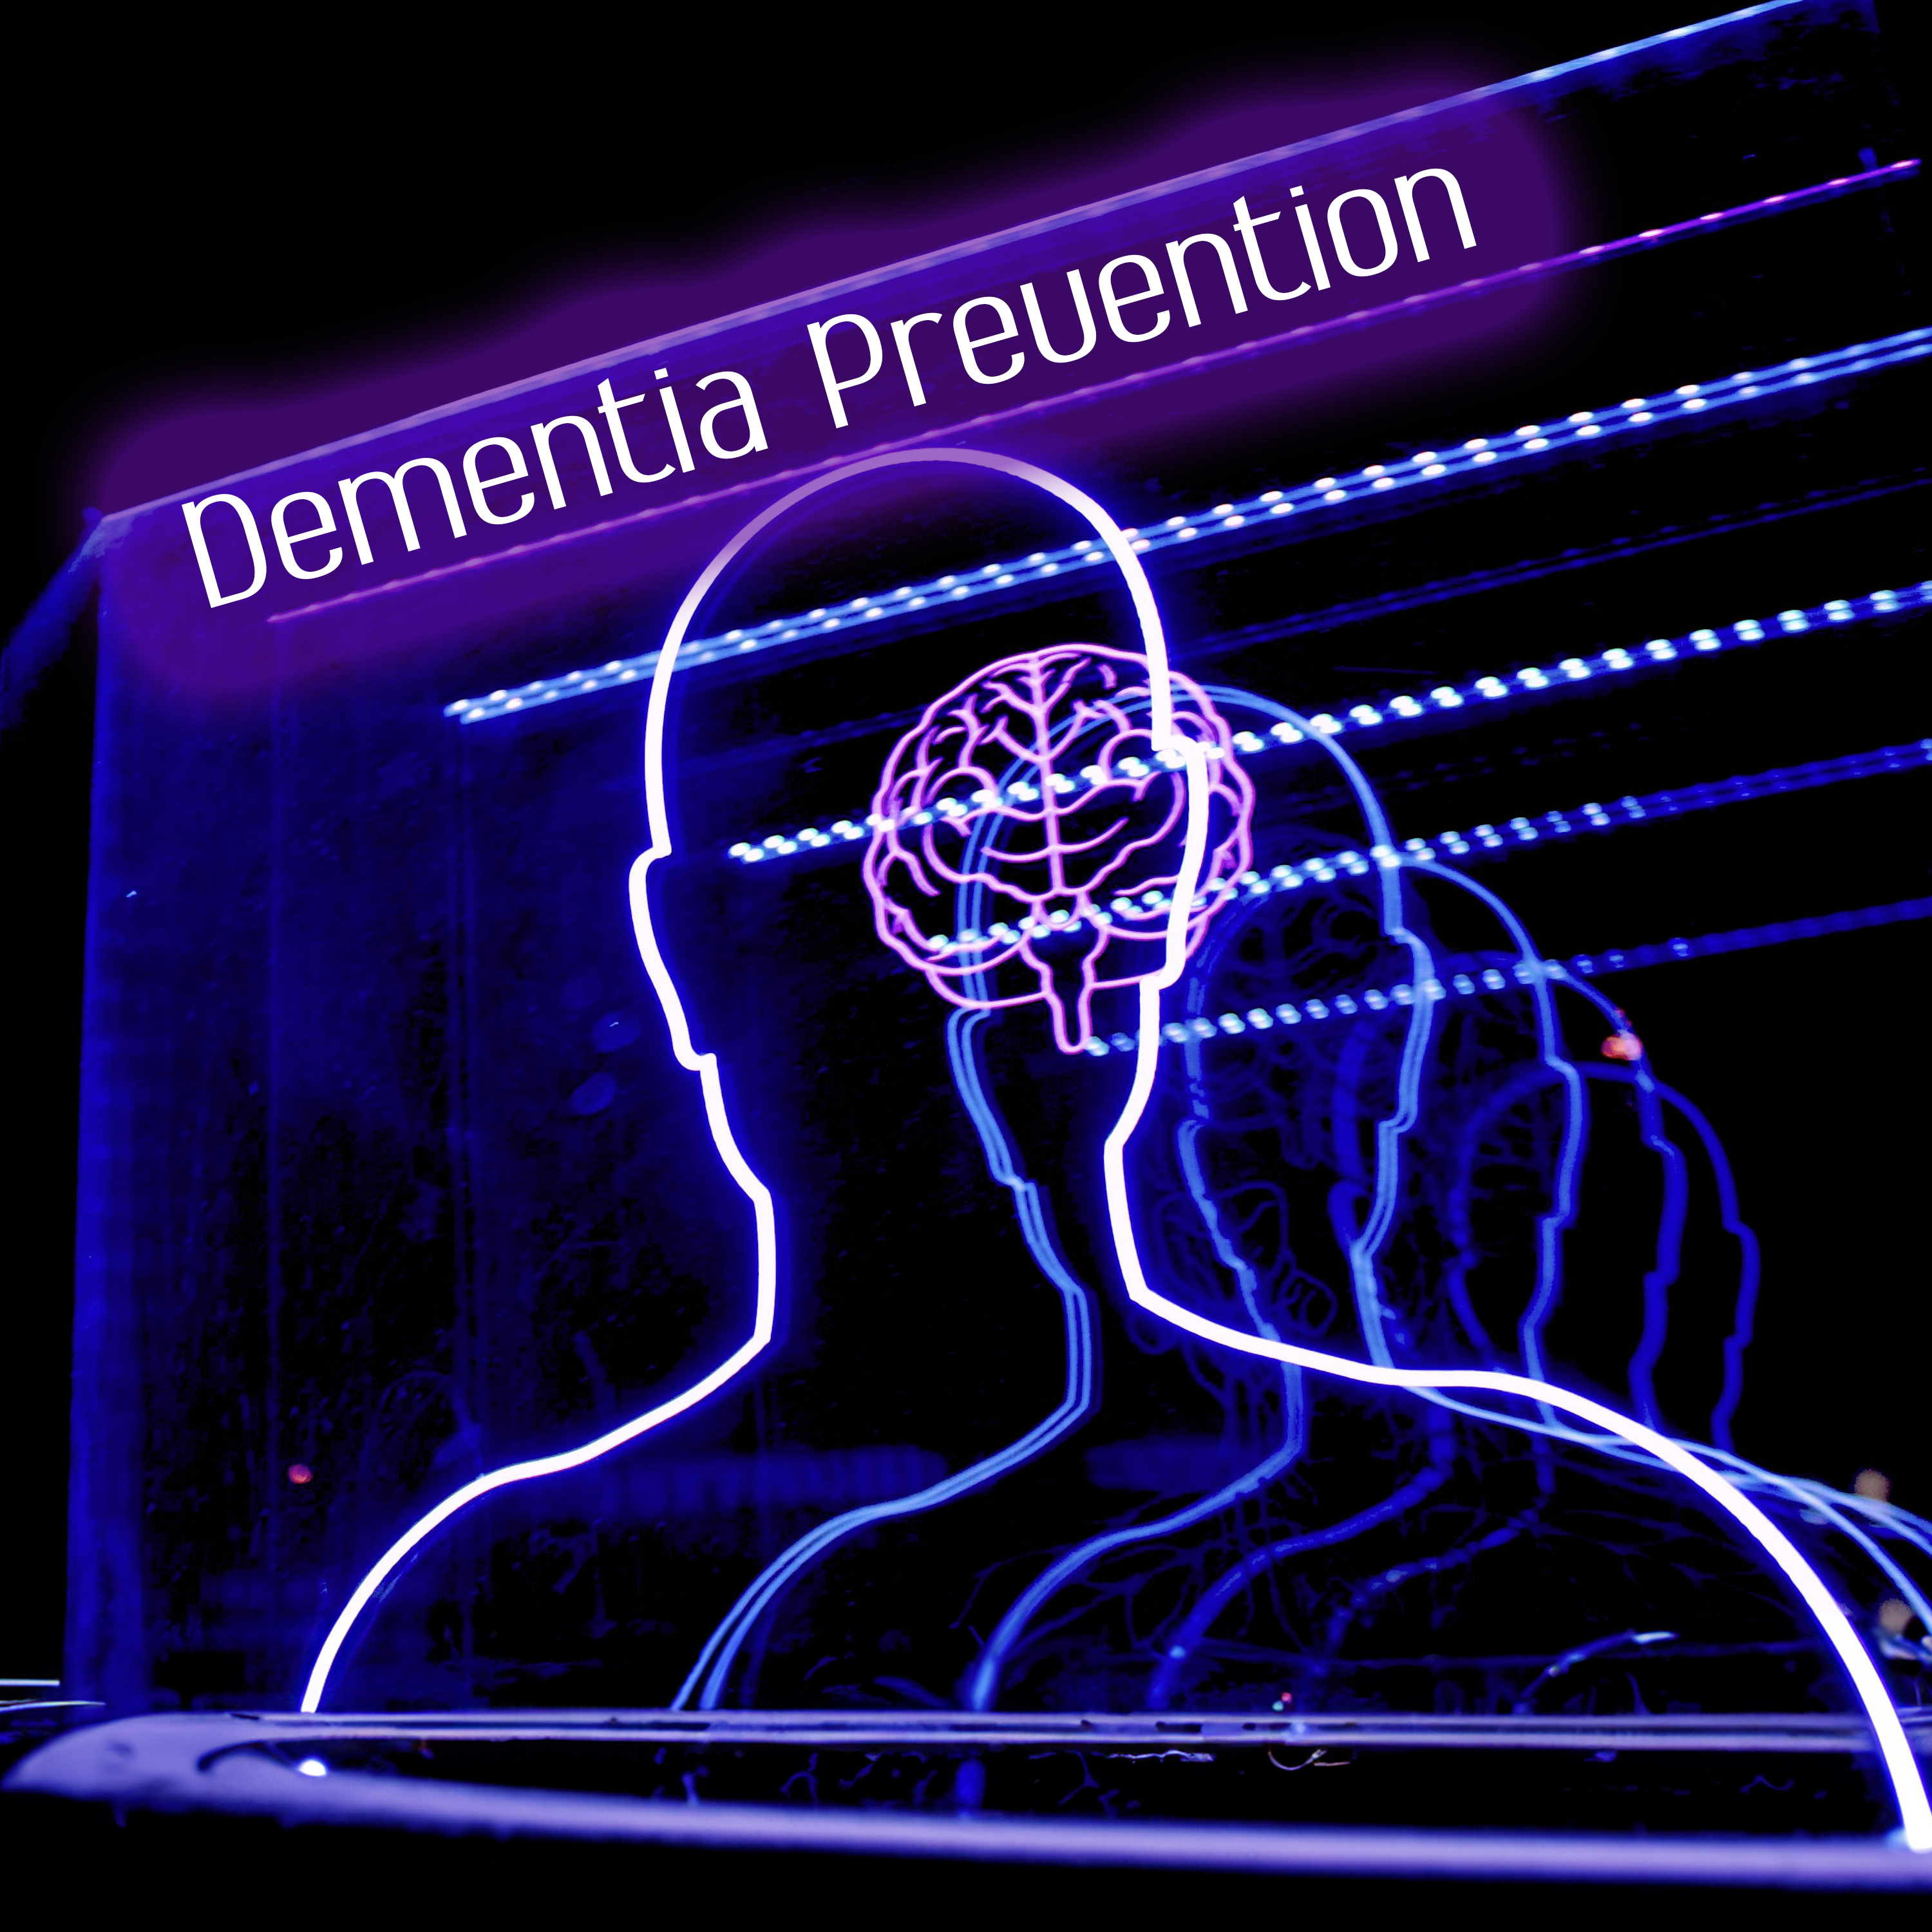 Dementia Prevention Knowledge: Why It's Important